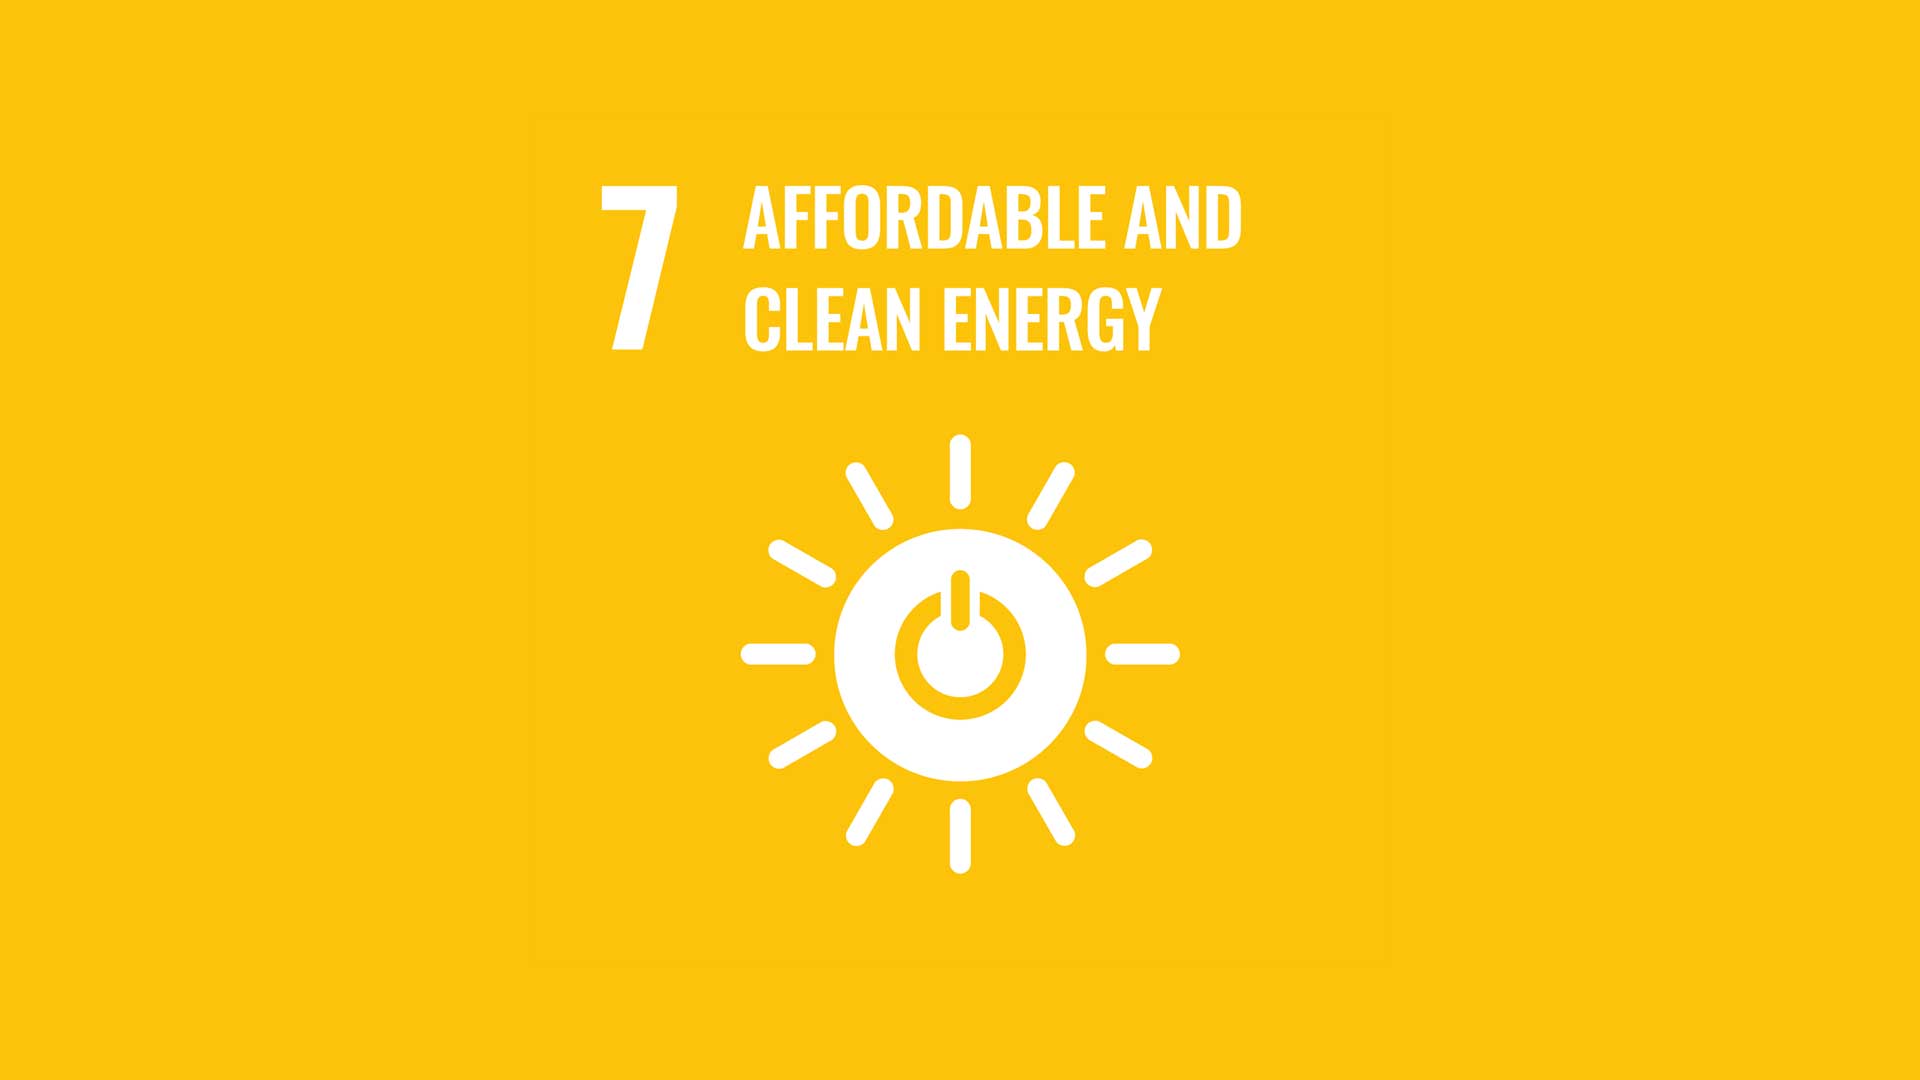 Affordable and Clean Energy Ensure access to affordable, reliable